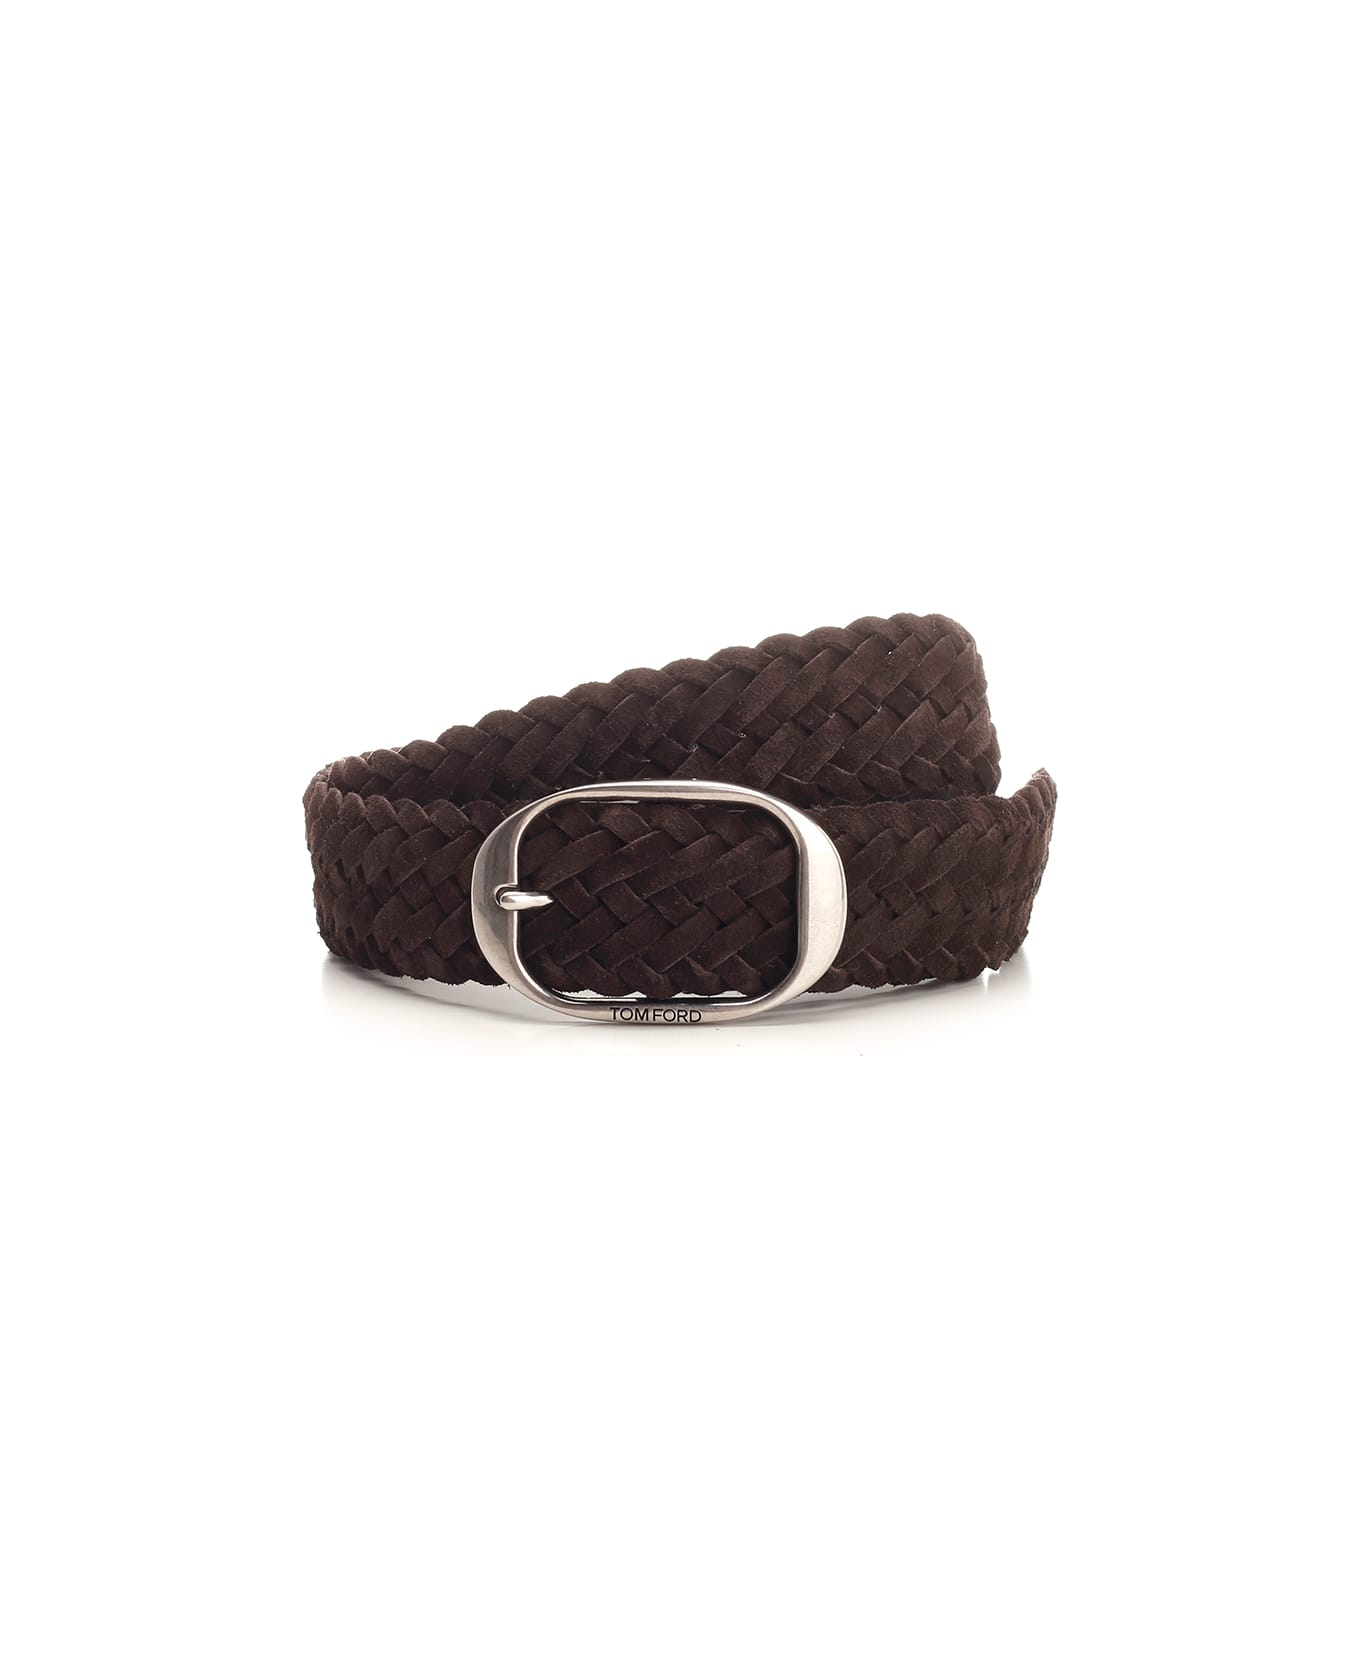 Tom Ford Woven Belt With Oval Buckle - Brown